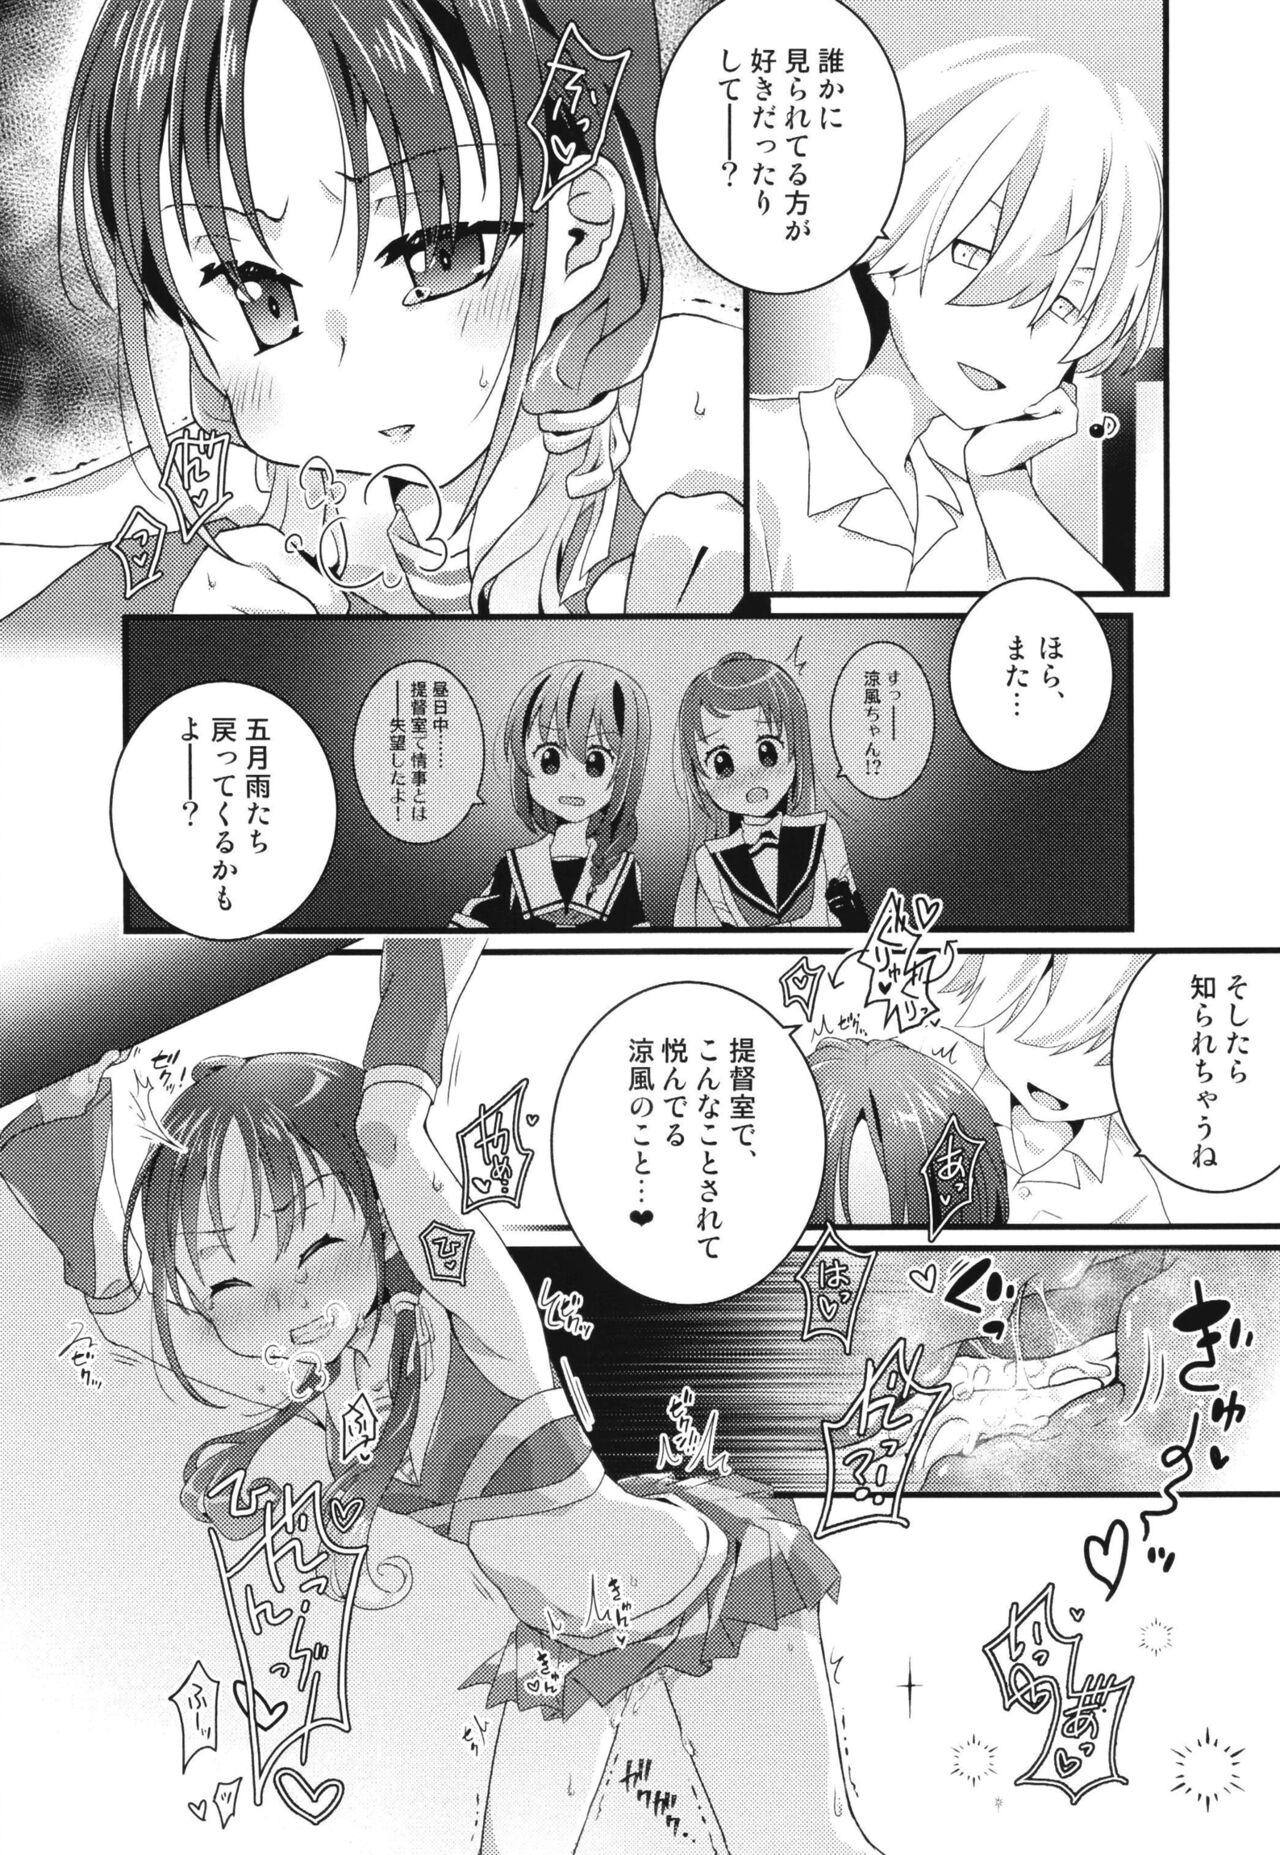 Hot Brunette Yah! Cheer! yeah! - Kantai collection Body Massage - Page 6